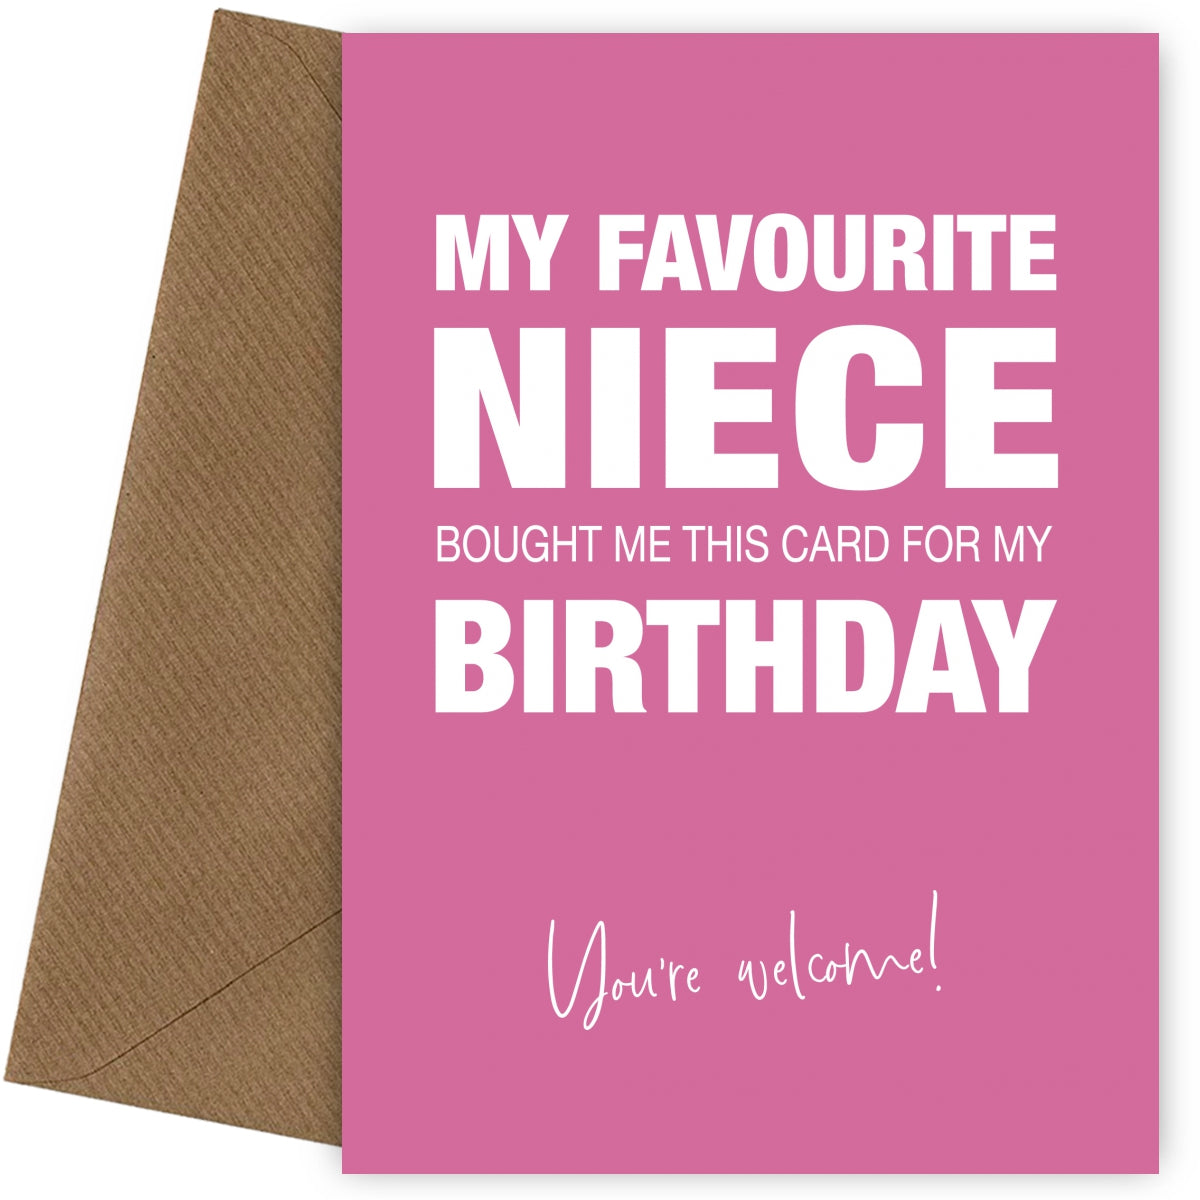 Funny Birthday Card for Auntie or Uncle - My Favourite Niece Gave Me This Card